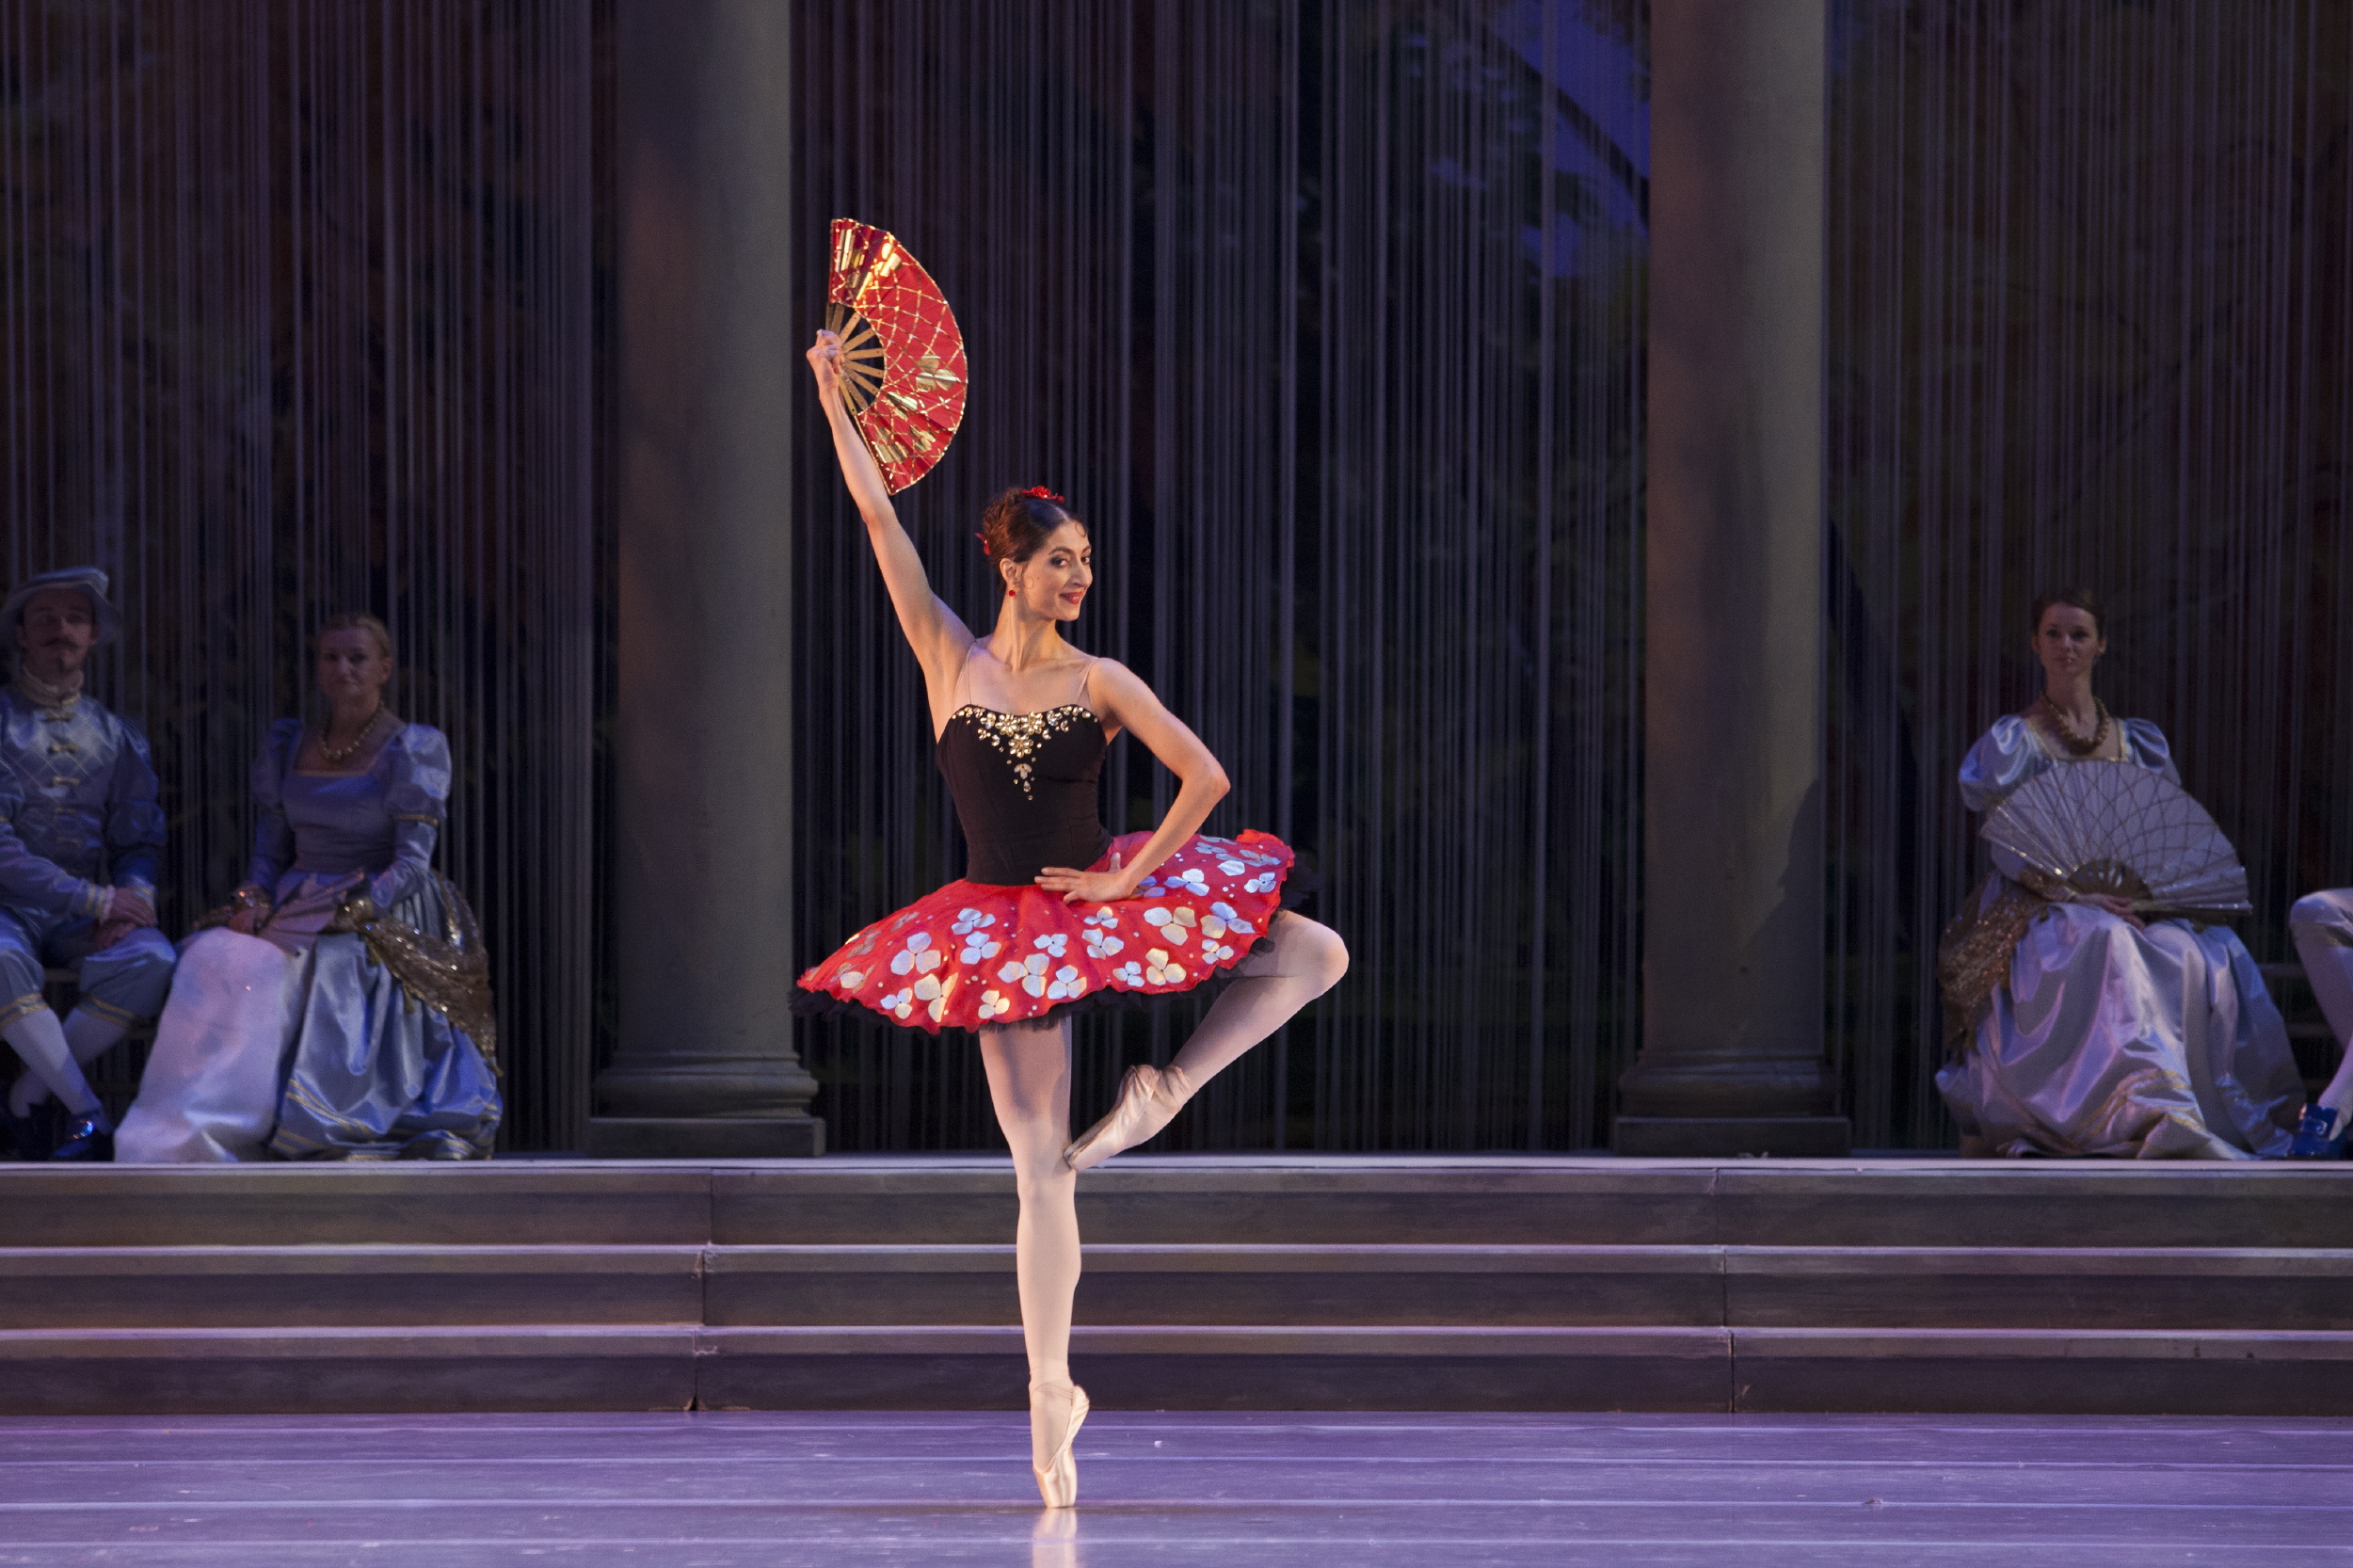 Pictured: Soloist Chinara Alizade onstage in a Spanish costume holding a fan in her raised arm.